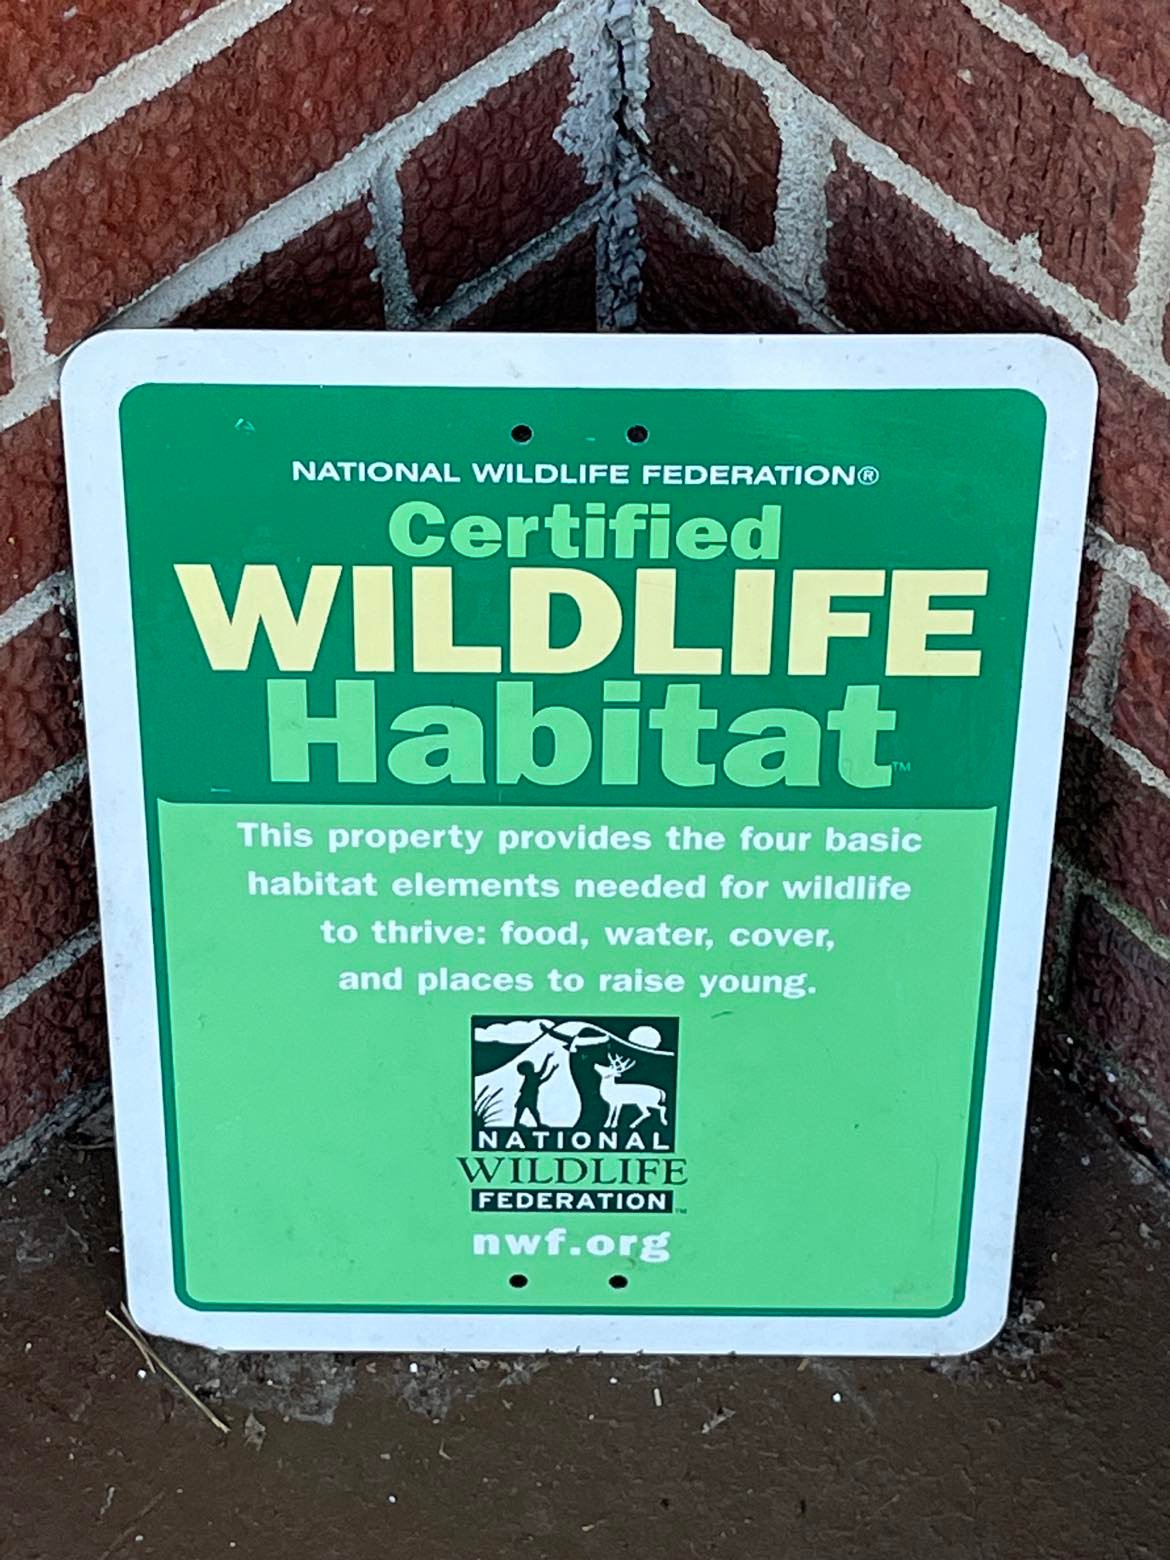 A bright green National Wildlife Federation Certified Wildlife Habitat Sign leans against brick wall. This property provides the four basic habitat elements needed for wildlife to thrive: food, water, cover, and places to raise young. nwf.org